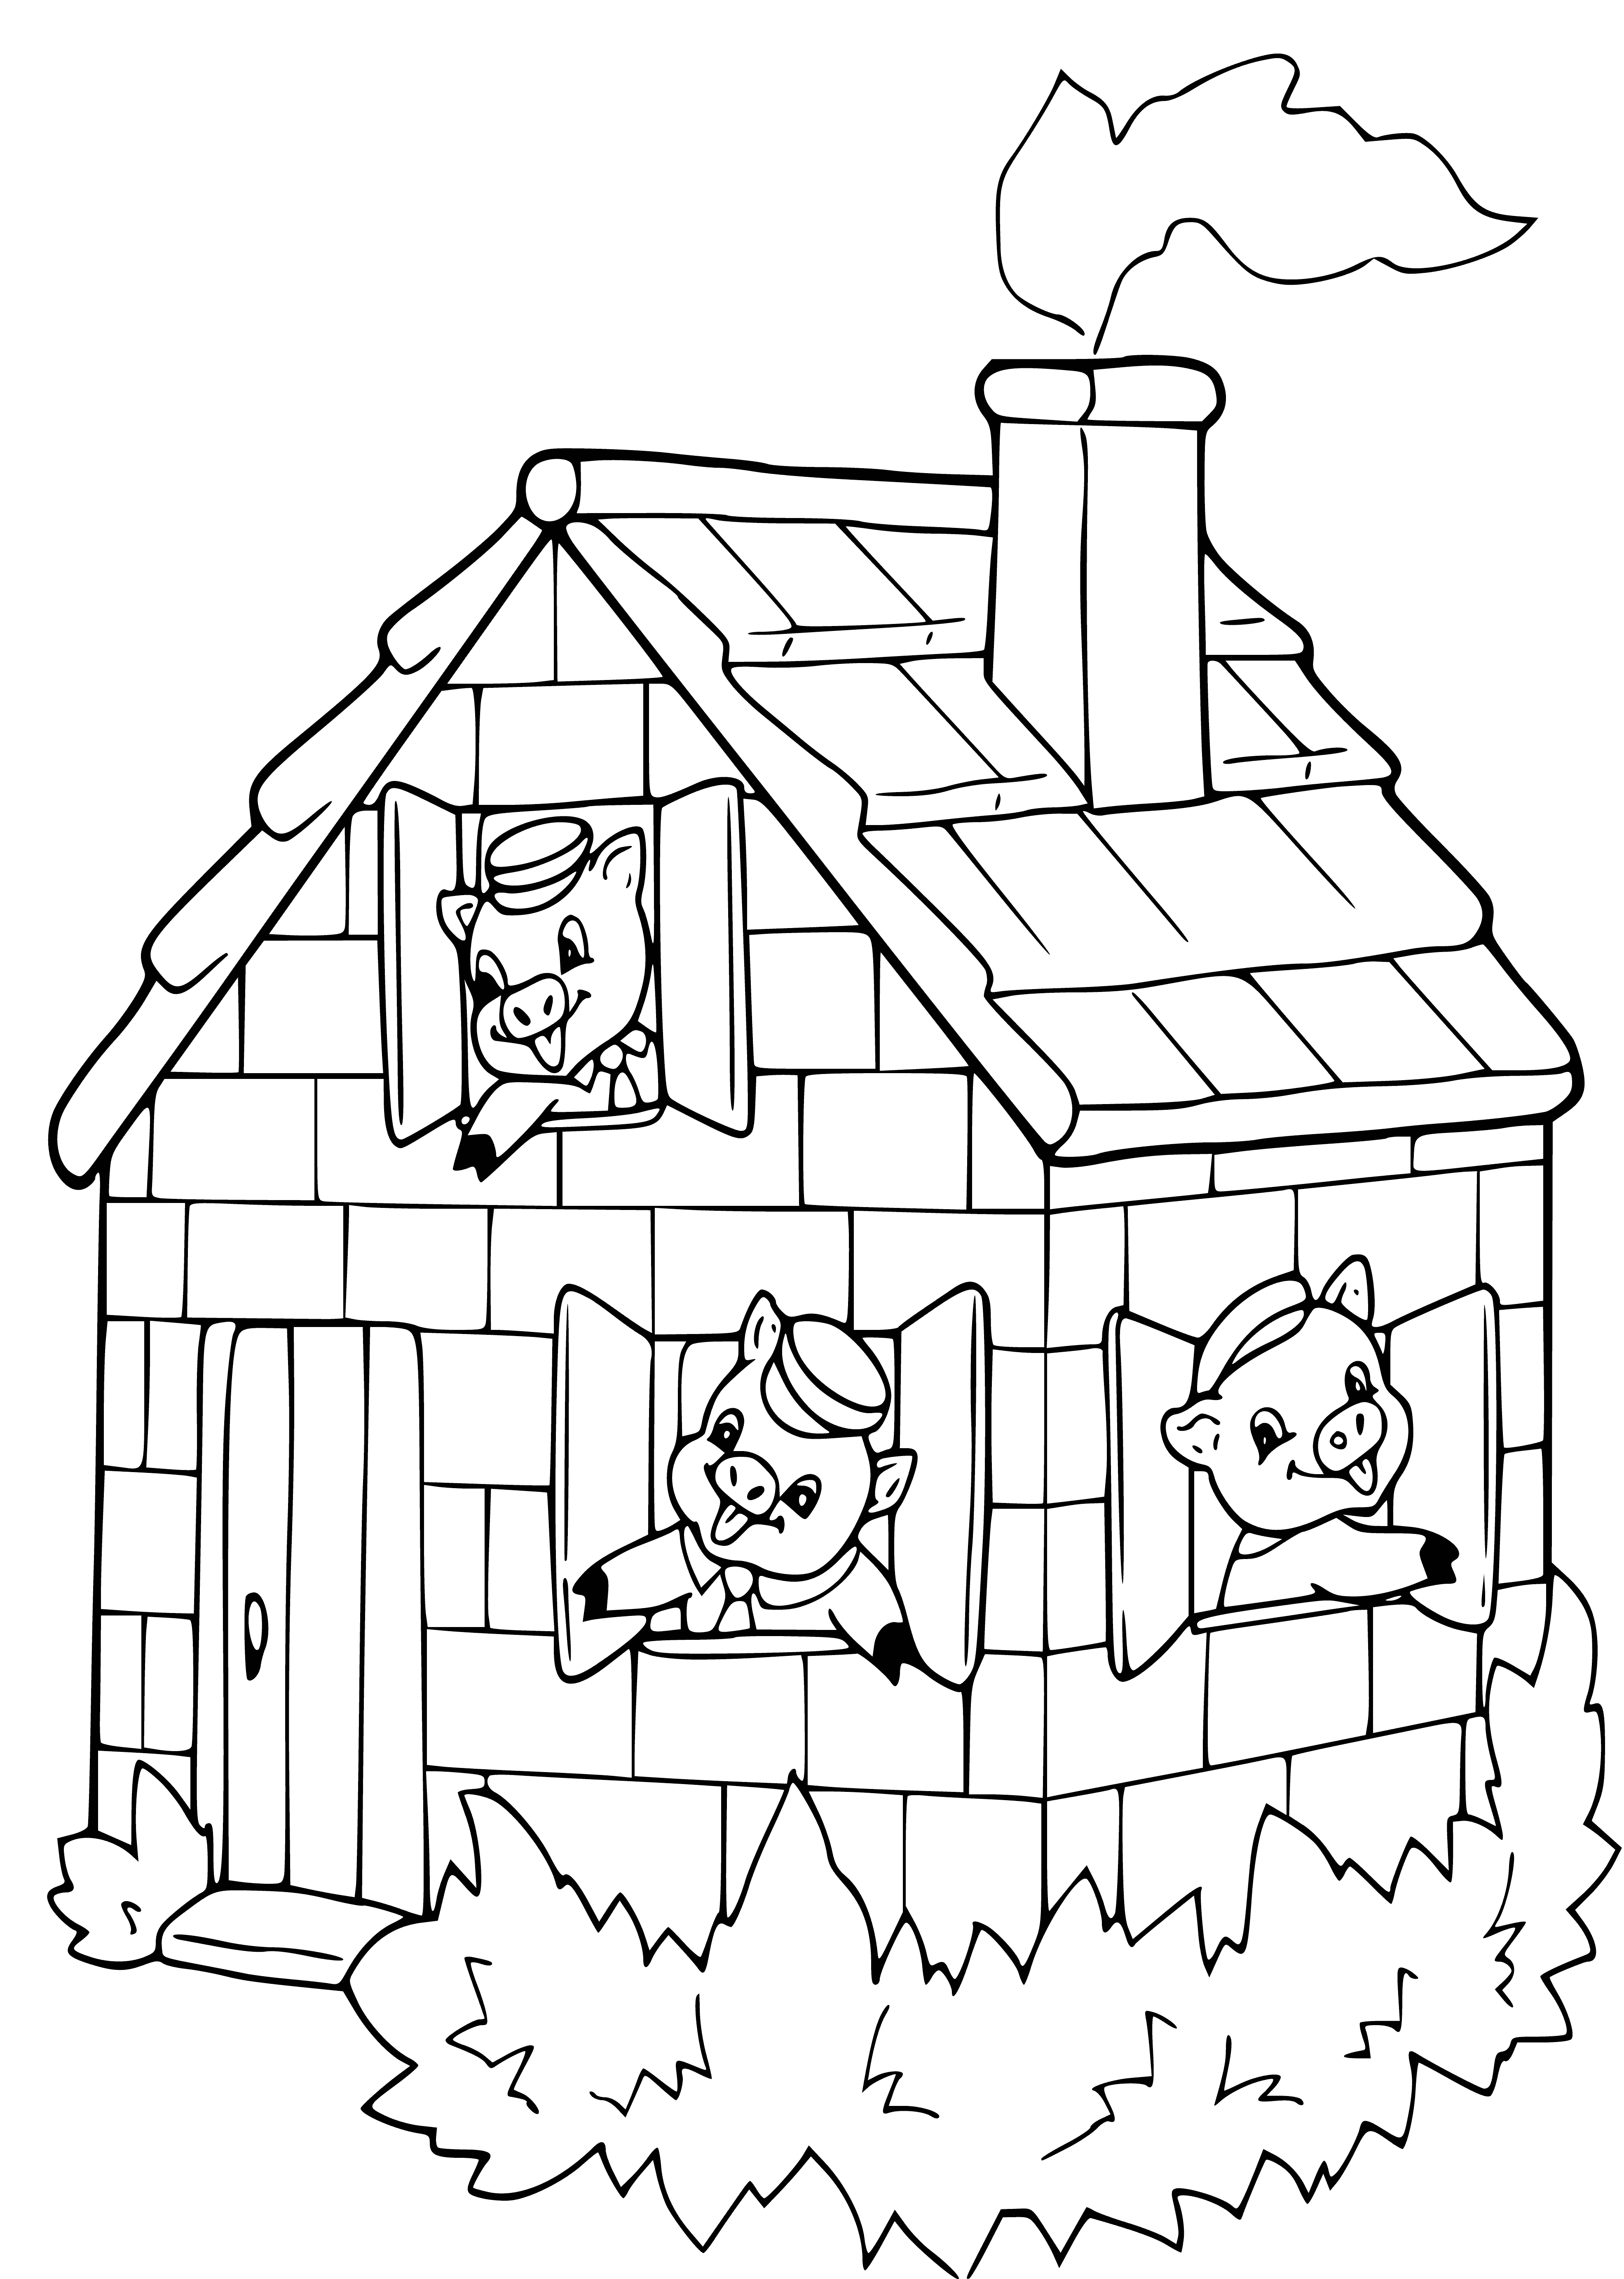 coloring page: 3 pigs build houses: straw, sticks & bricks. Wolf huffs & puffs, but 3rd house too strong. Pigs safe!